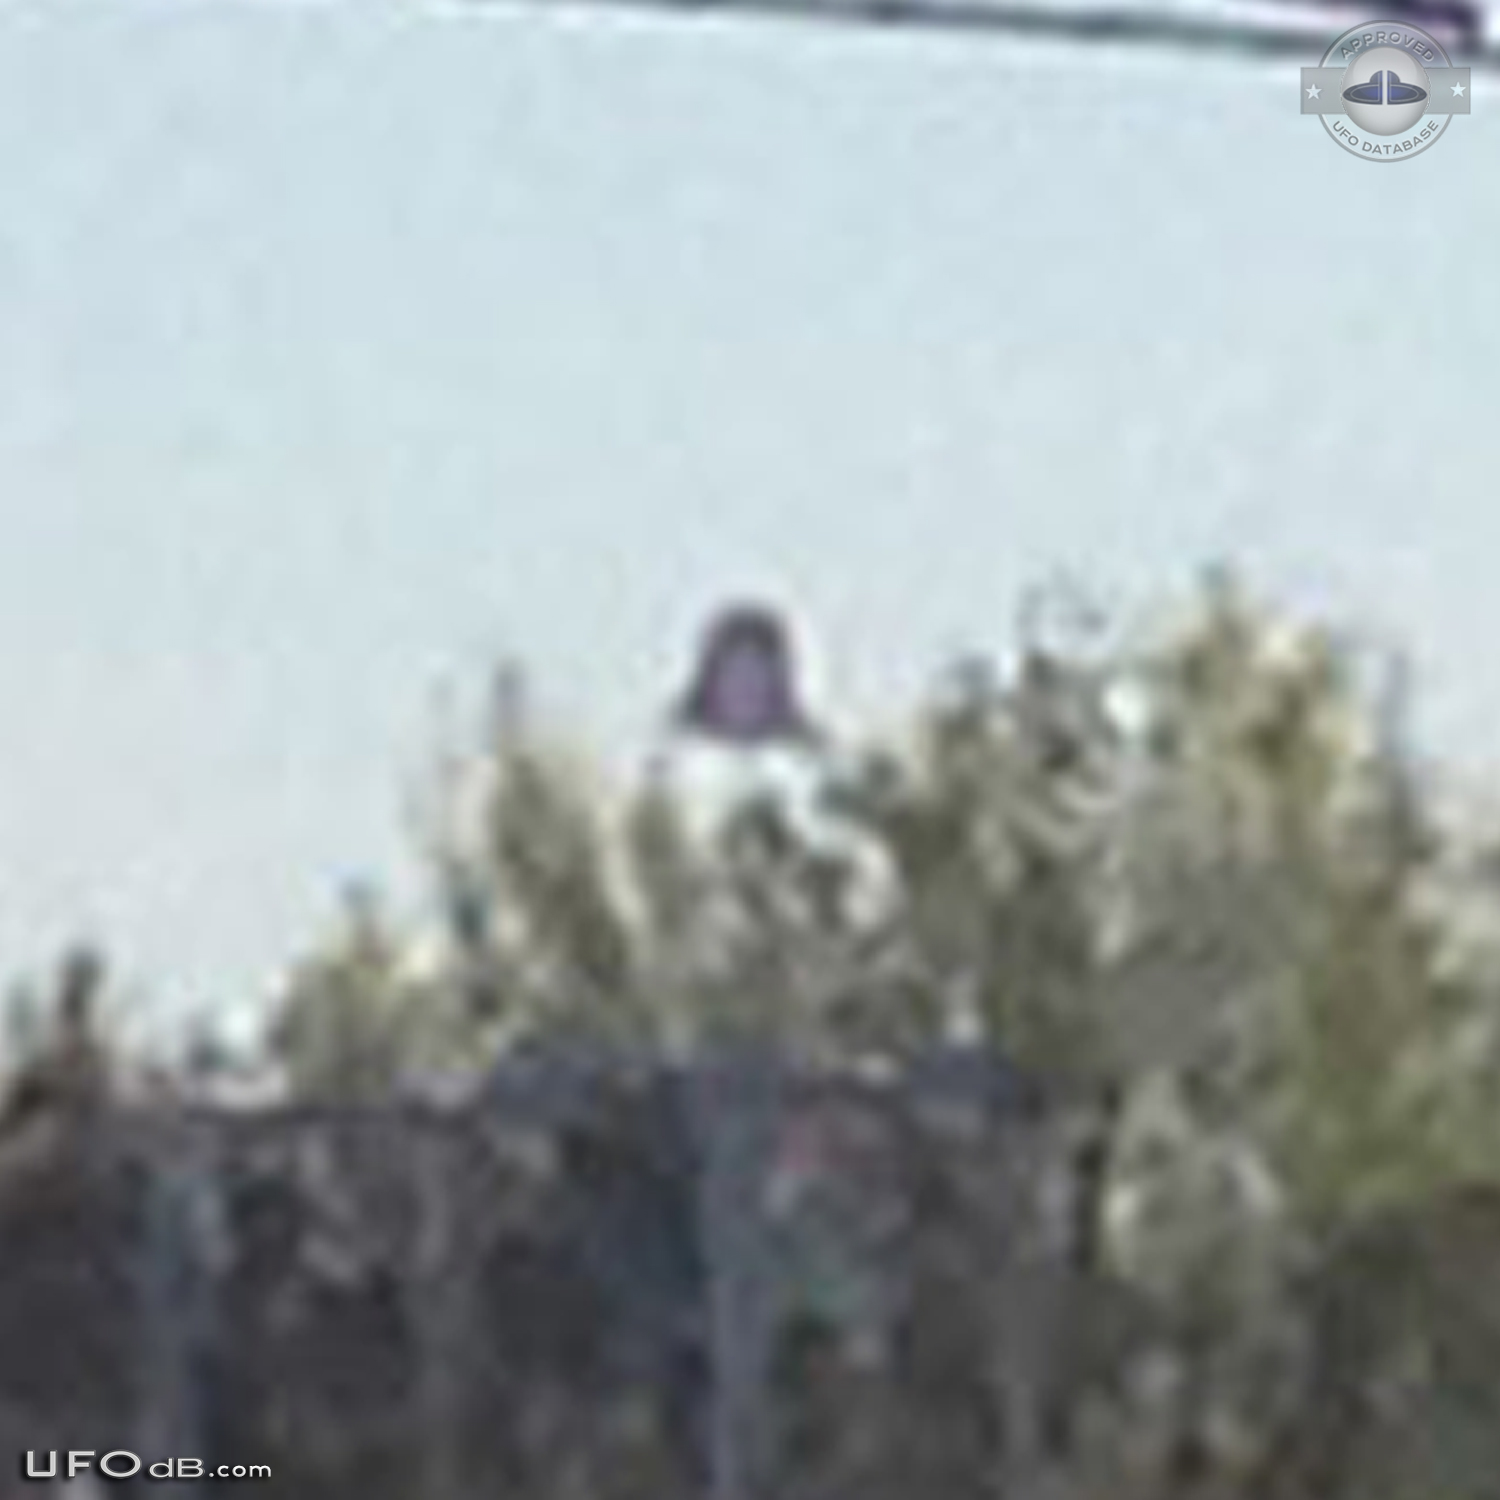 Massive Bell Shaped UFO over Sawtooth National Forest in Idaho 2014 UFO Picture #566-6